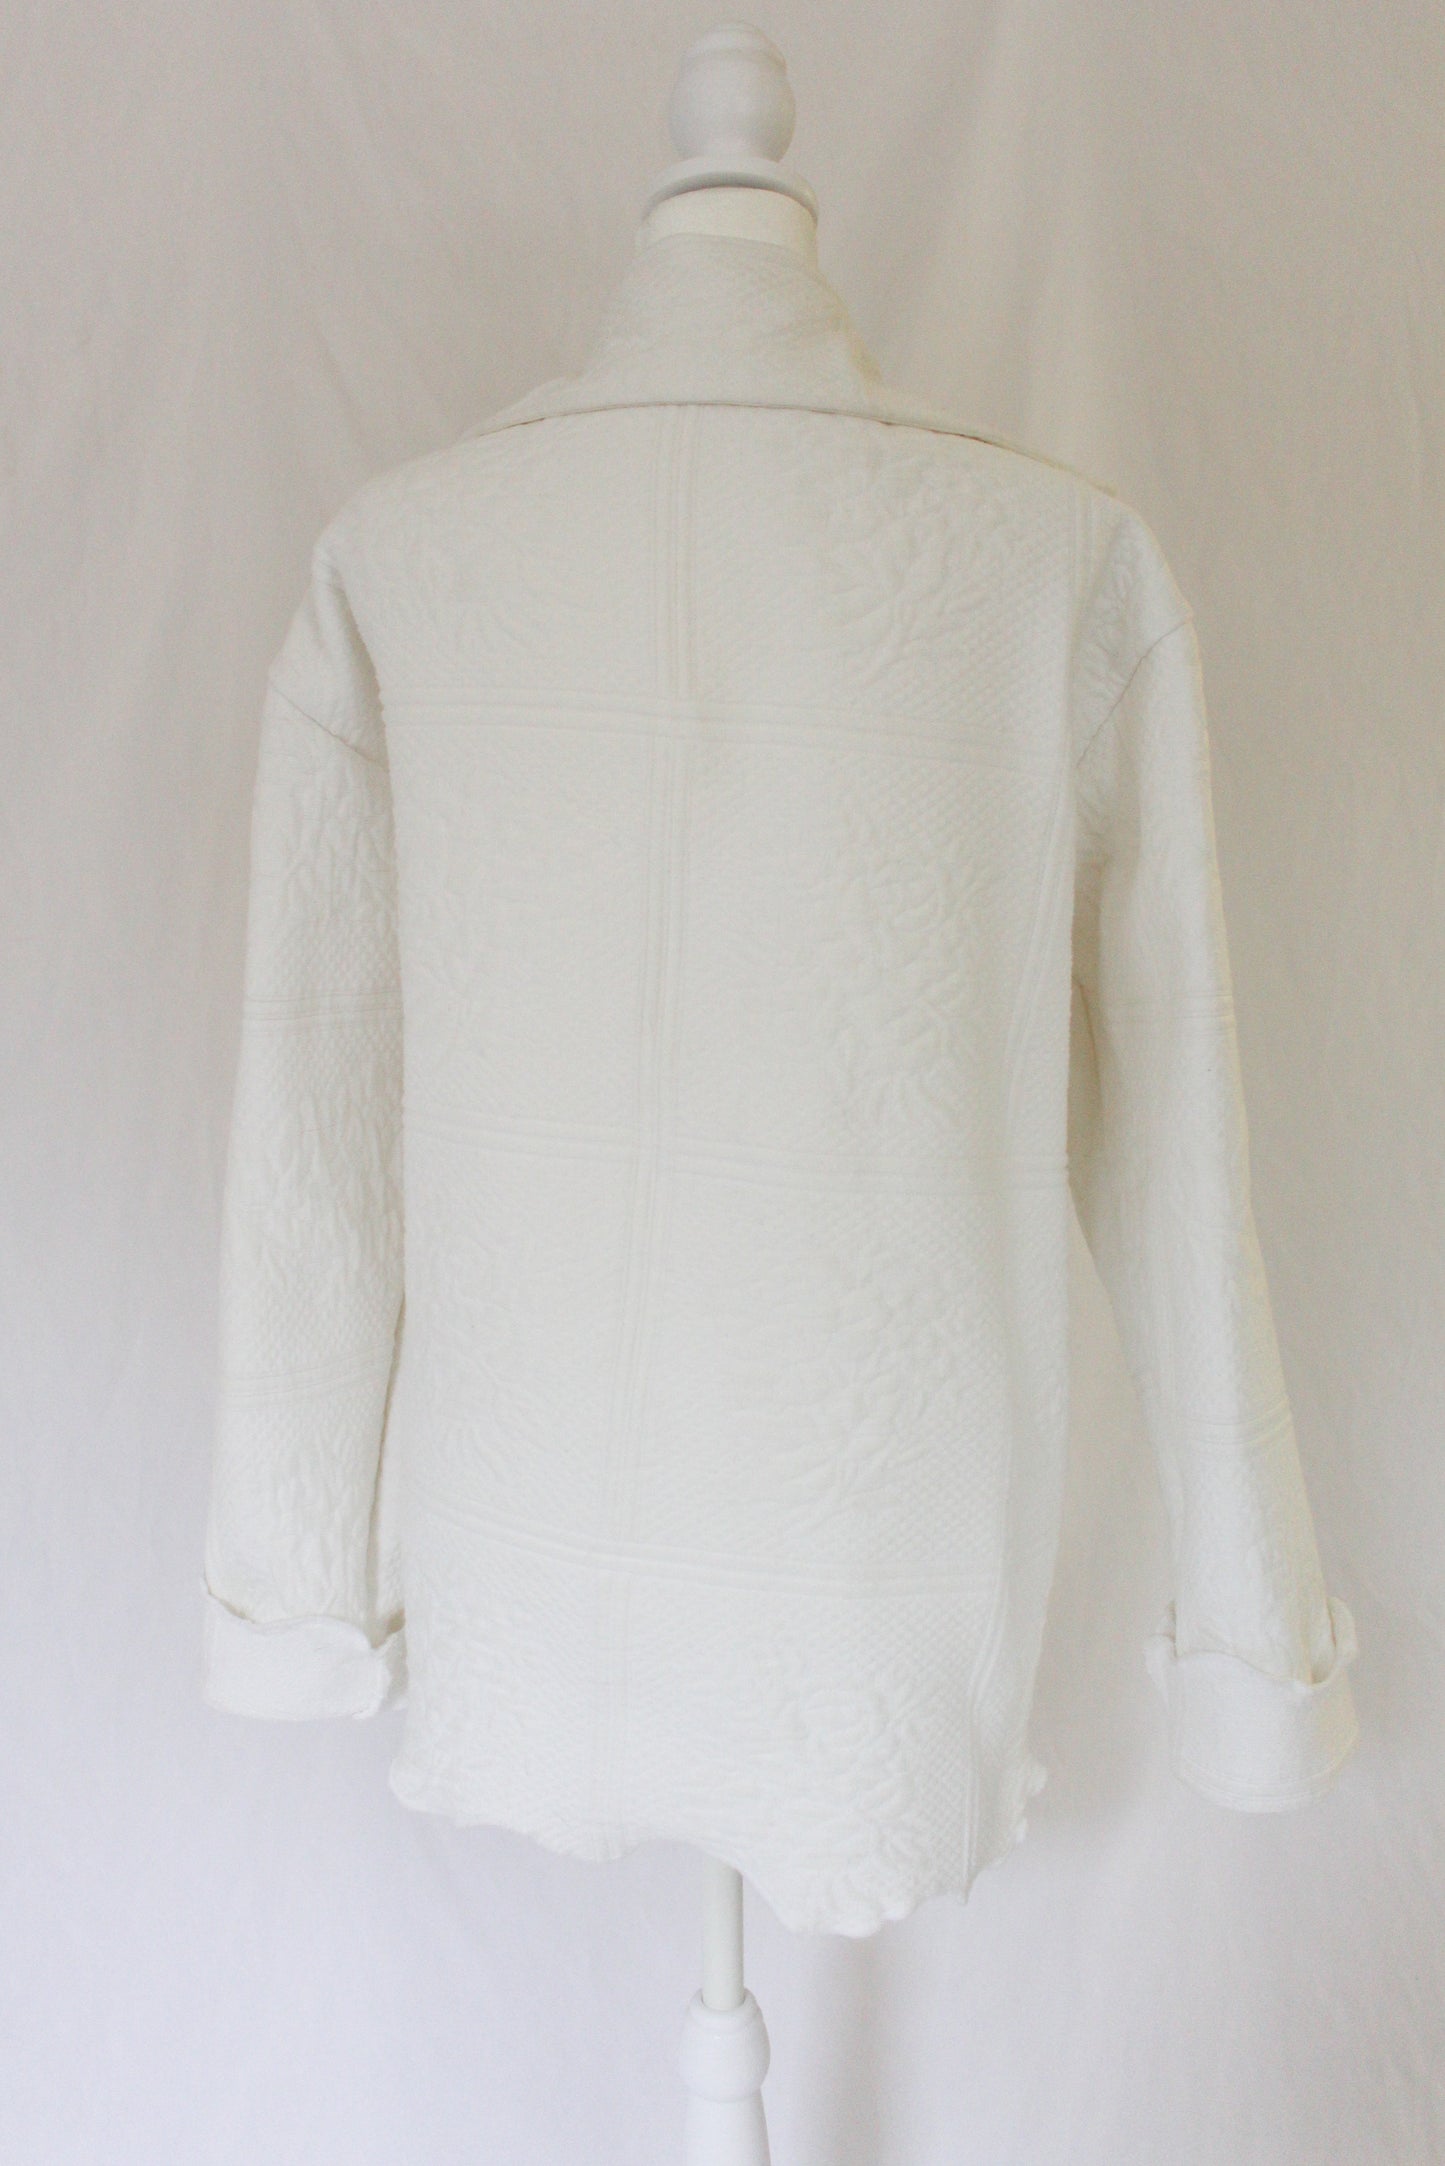 quilt coat with scalloped edge, white quilt coat, white quilt jacket, collared quilt jacket